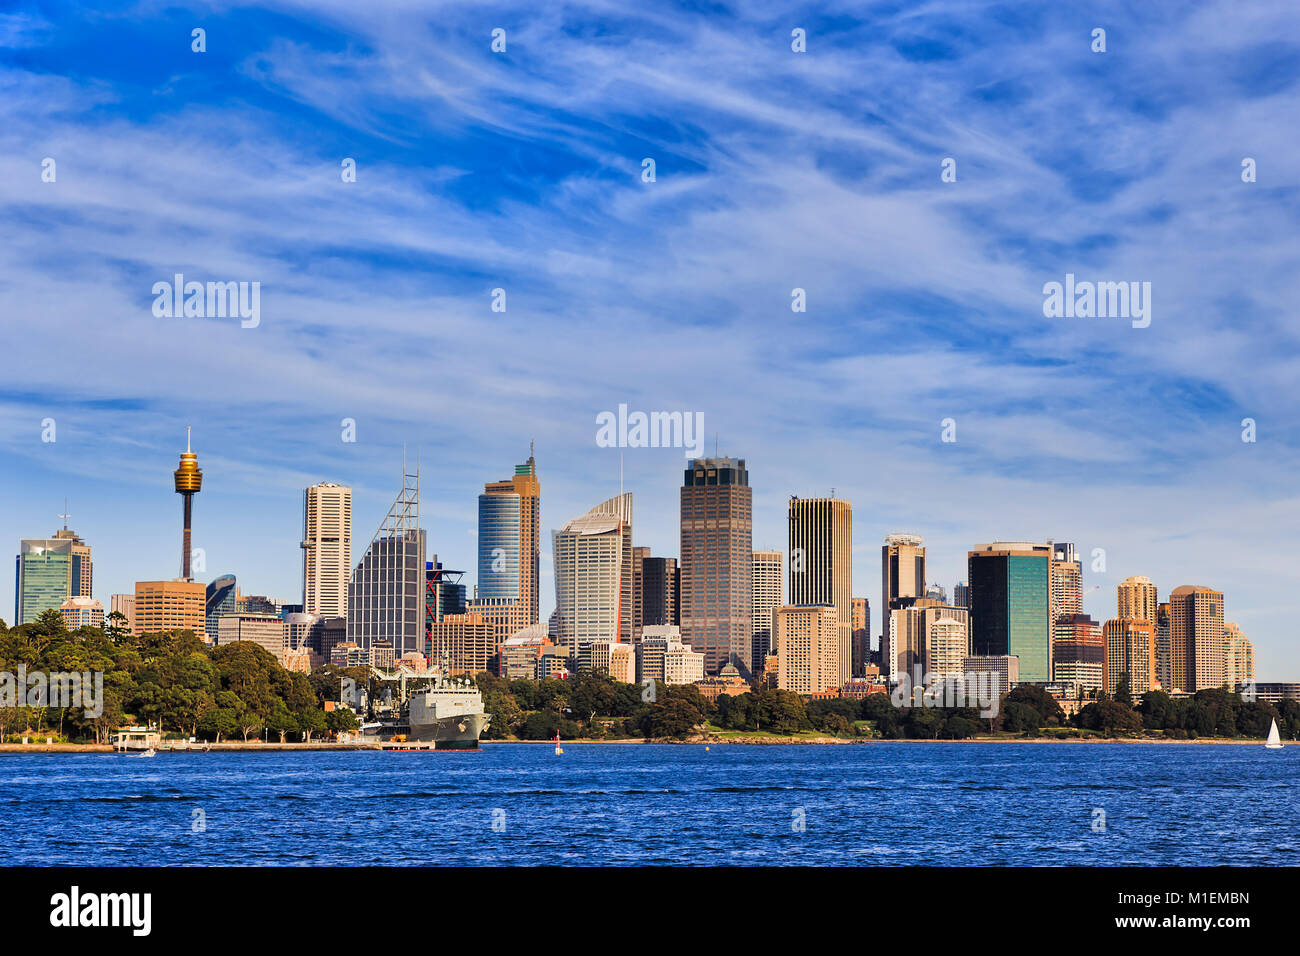 Sydney city CBD high-rise towers rising above blue waters of harbour on a sunny bright day under blue sky. Stock Photo